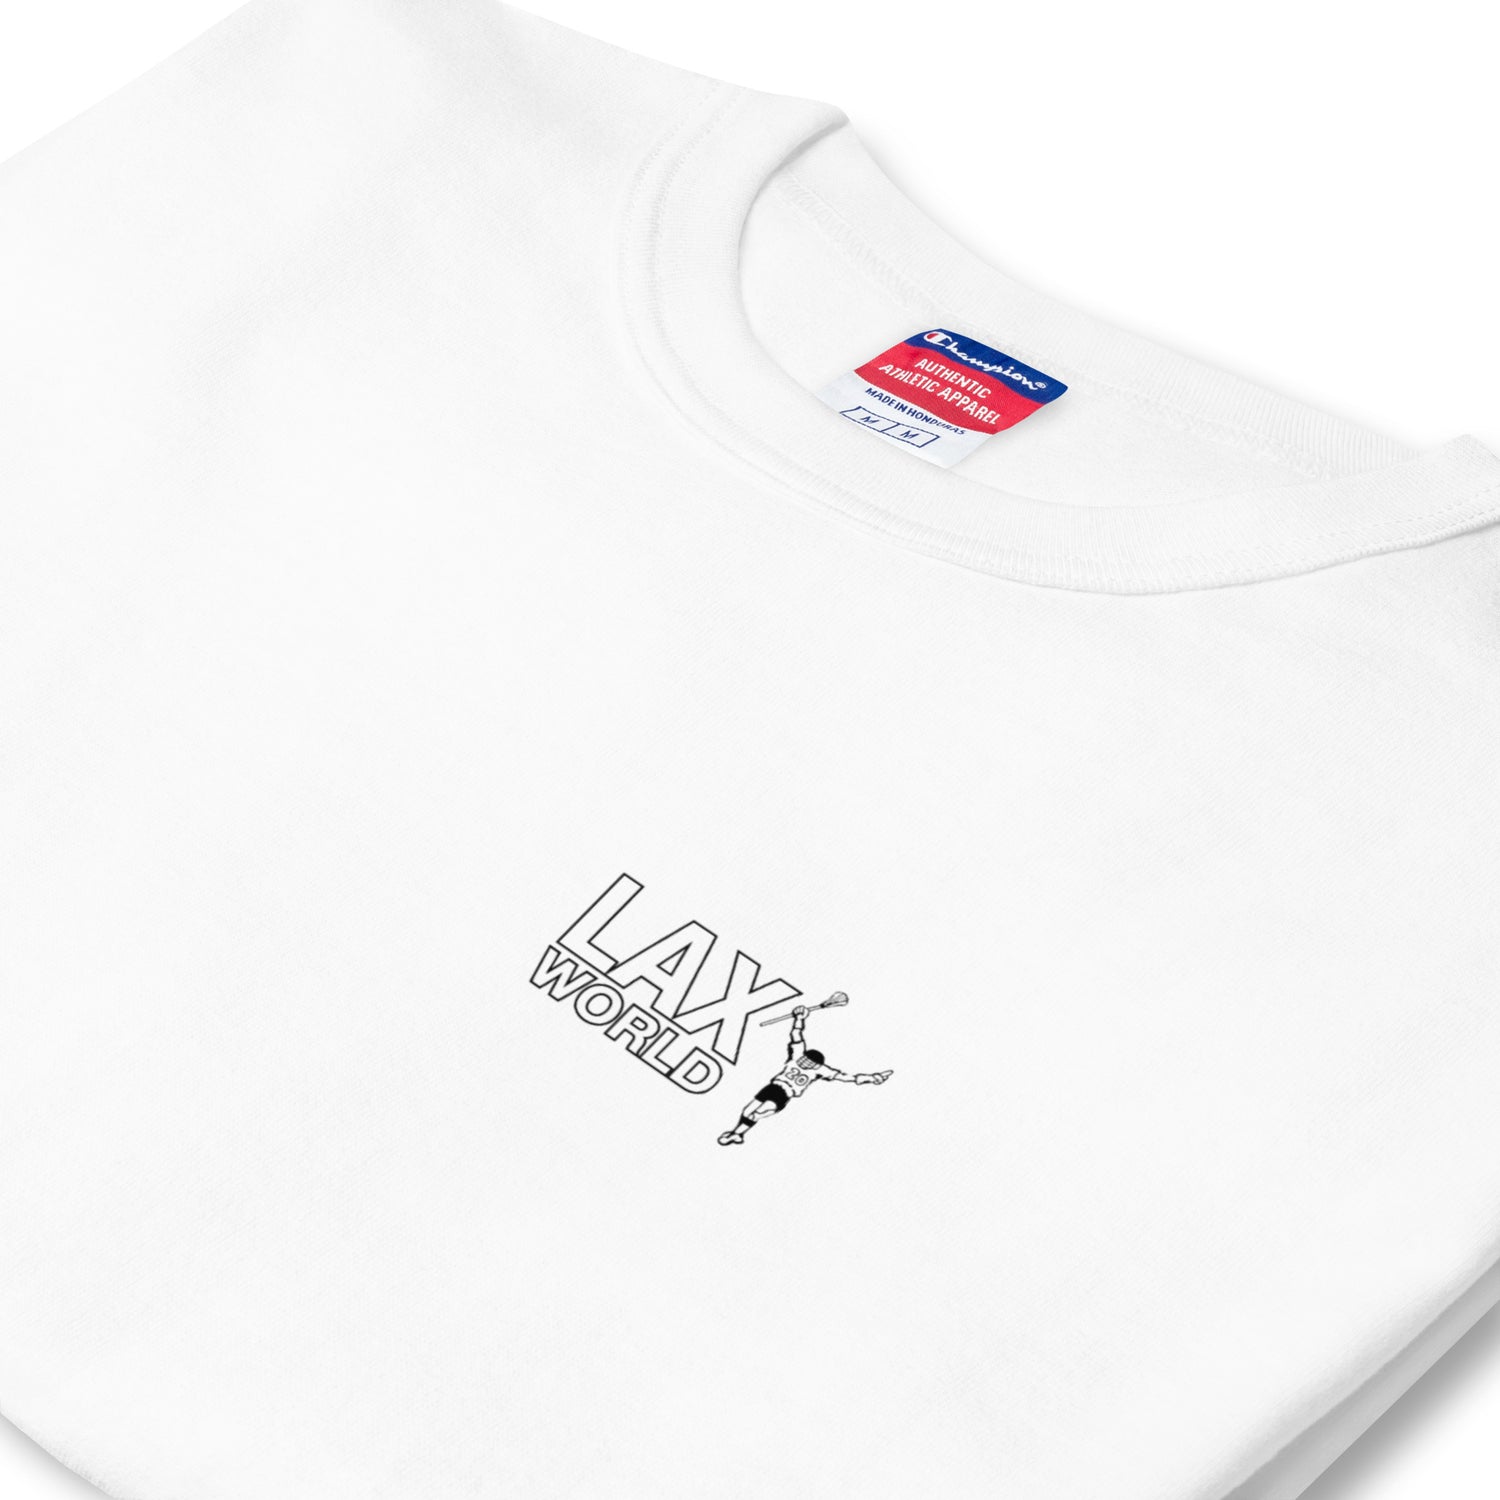 Premium LAX World x Champion's White Heritage Lacrosse Shirt - White Front top with Logo 